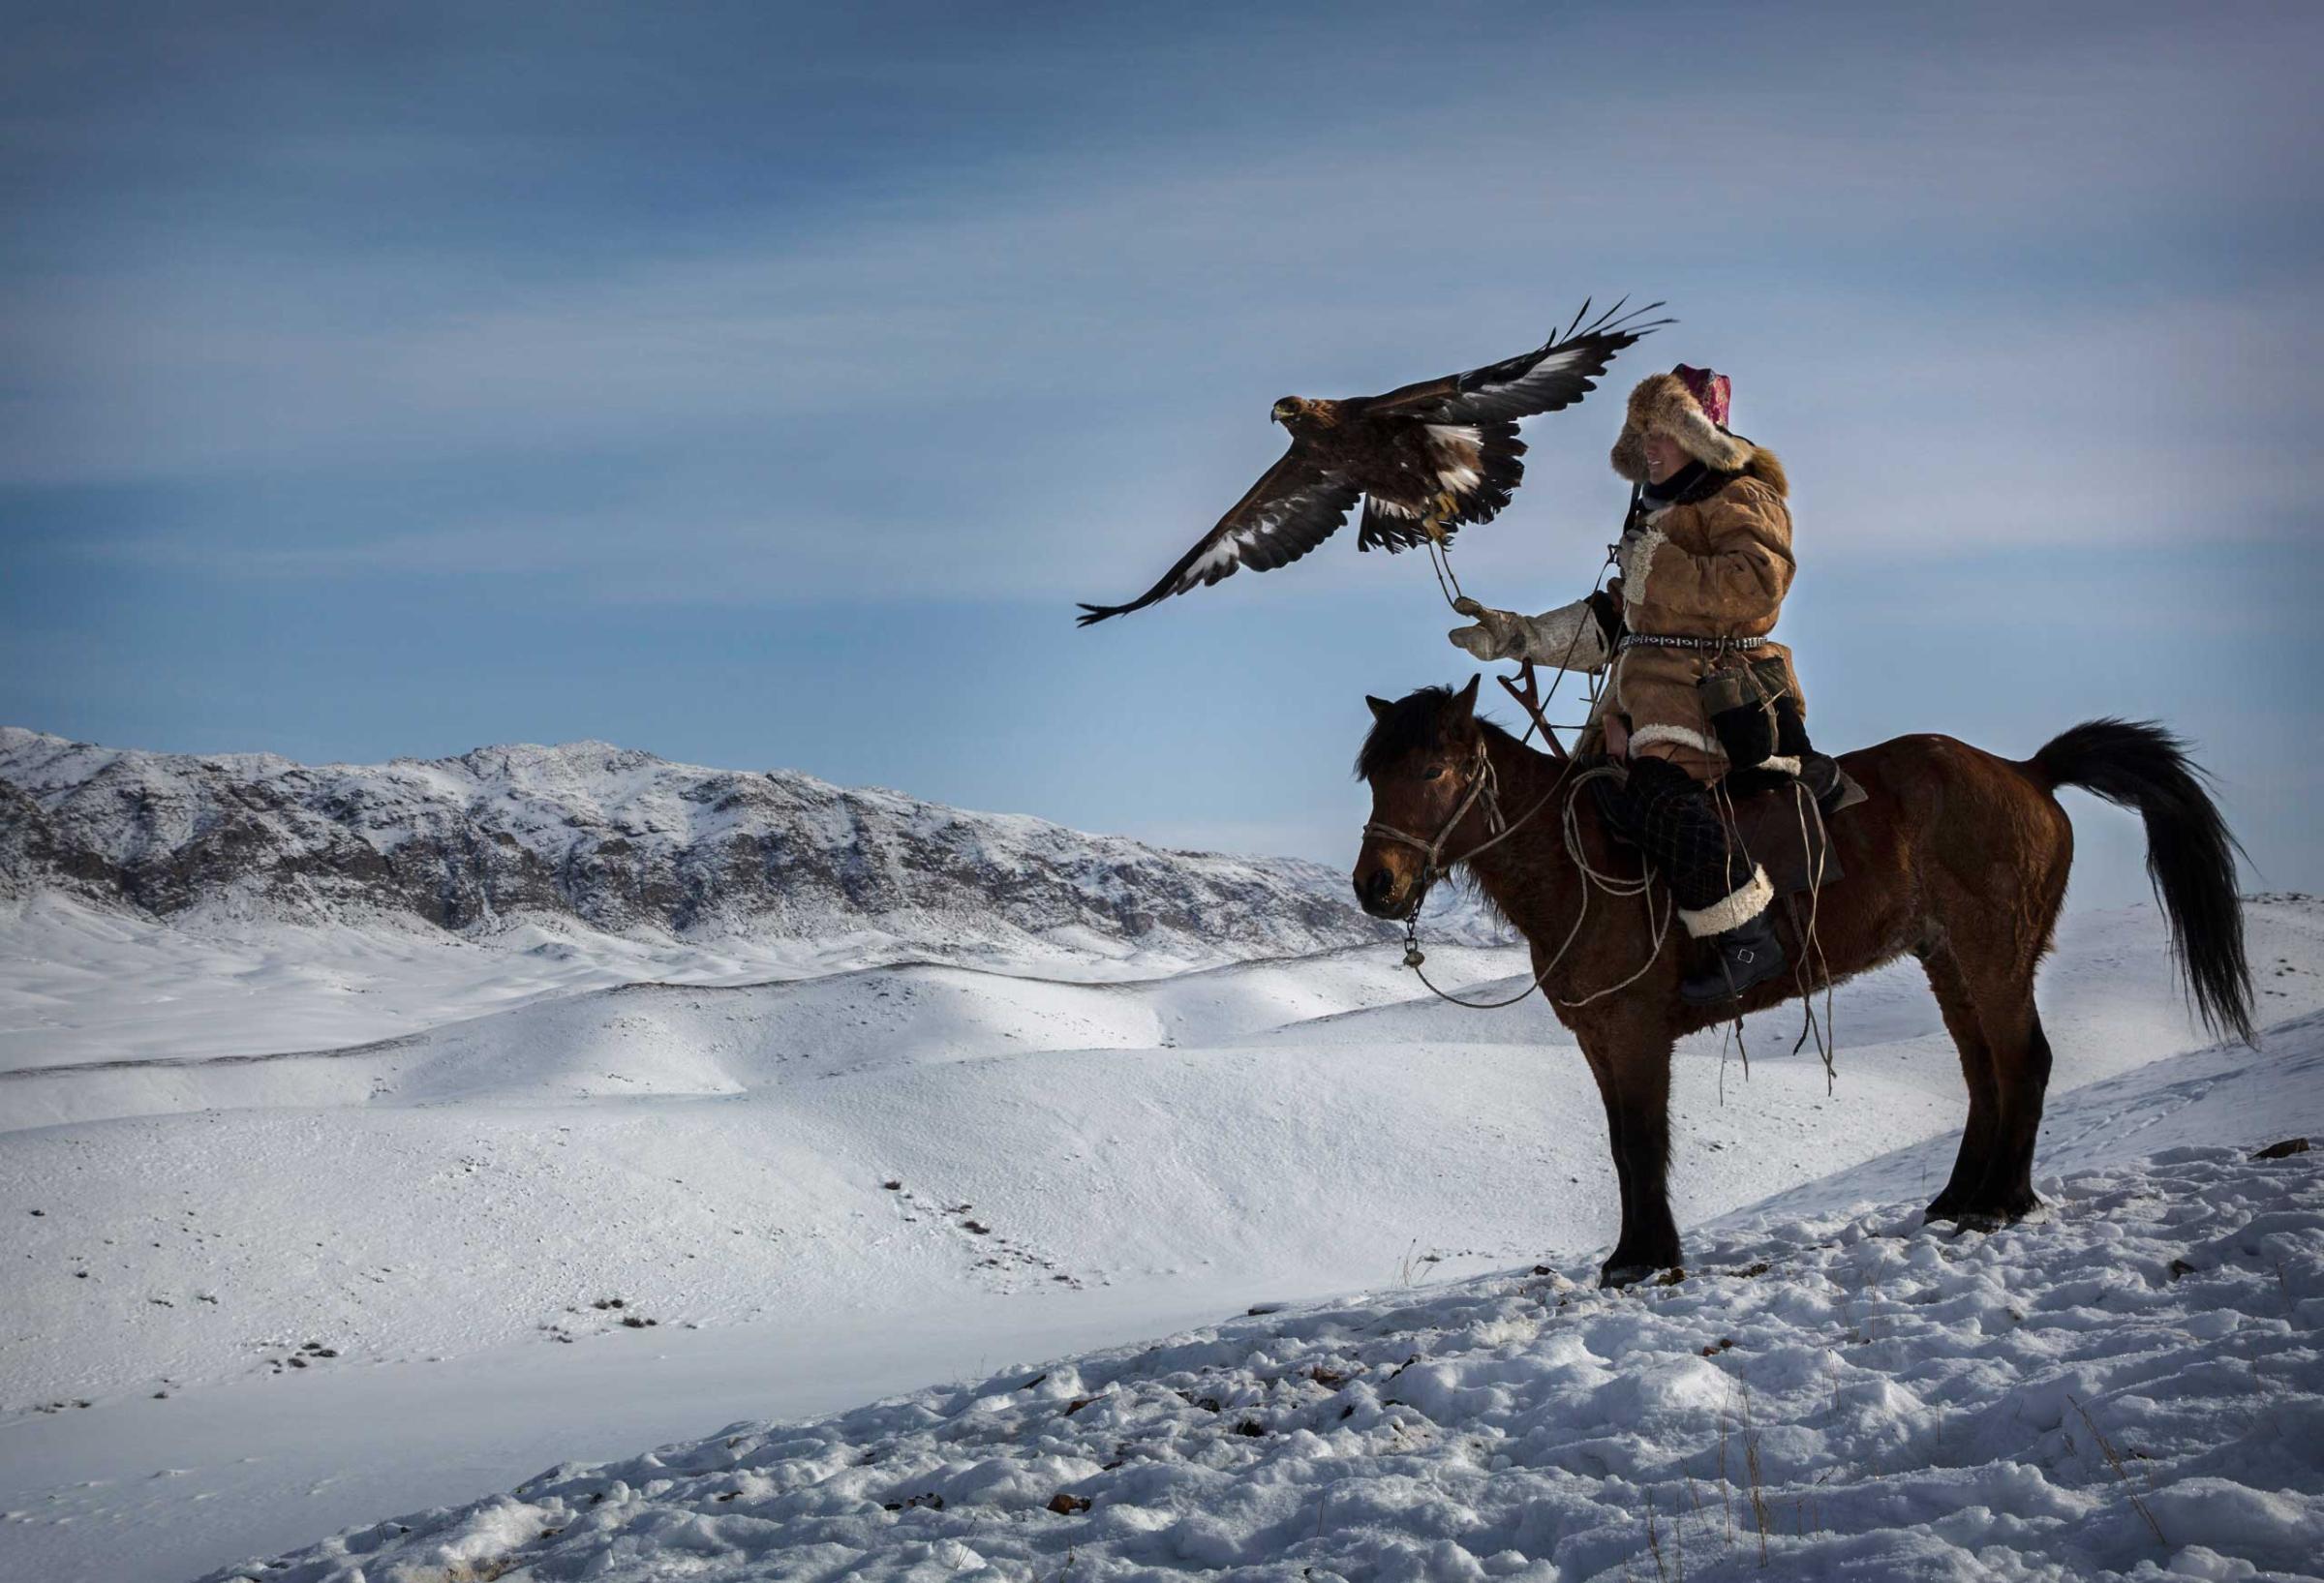 Chinese Kazakh eagle hunter releases his eagle during a local competition in the mountains of Qinghe County, Xinjiang, northwestern China.